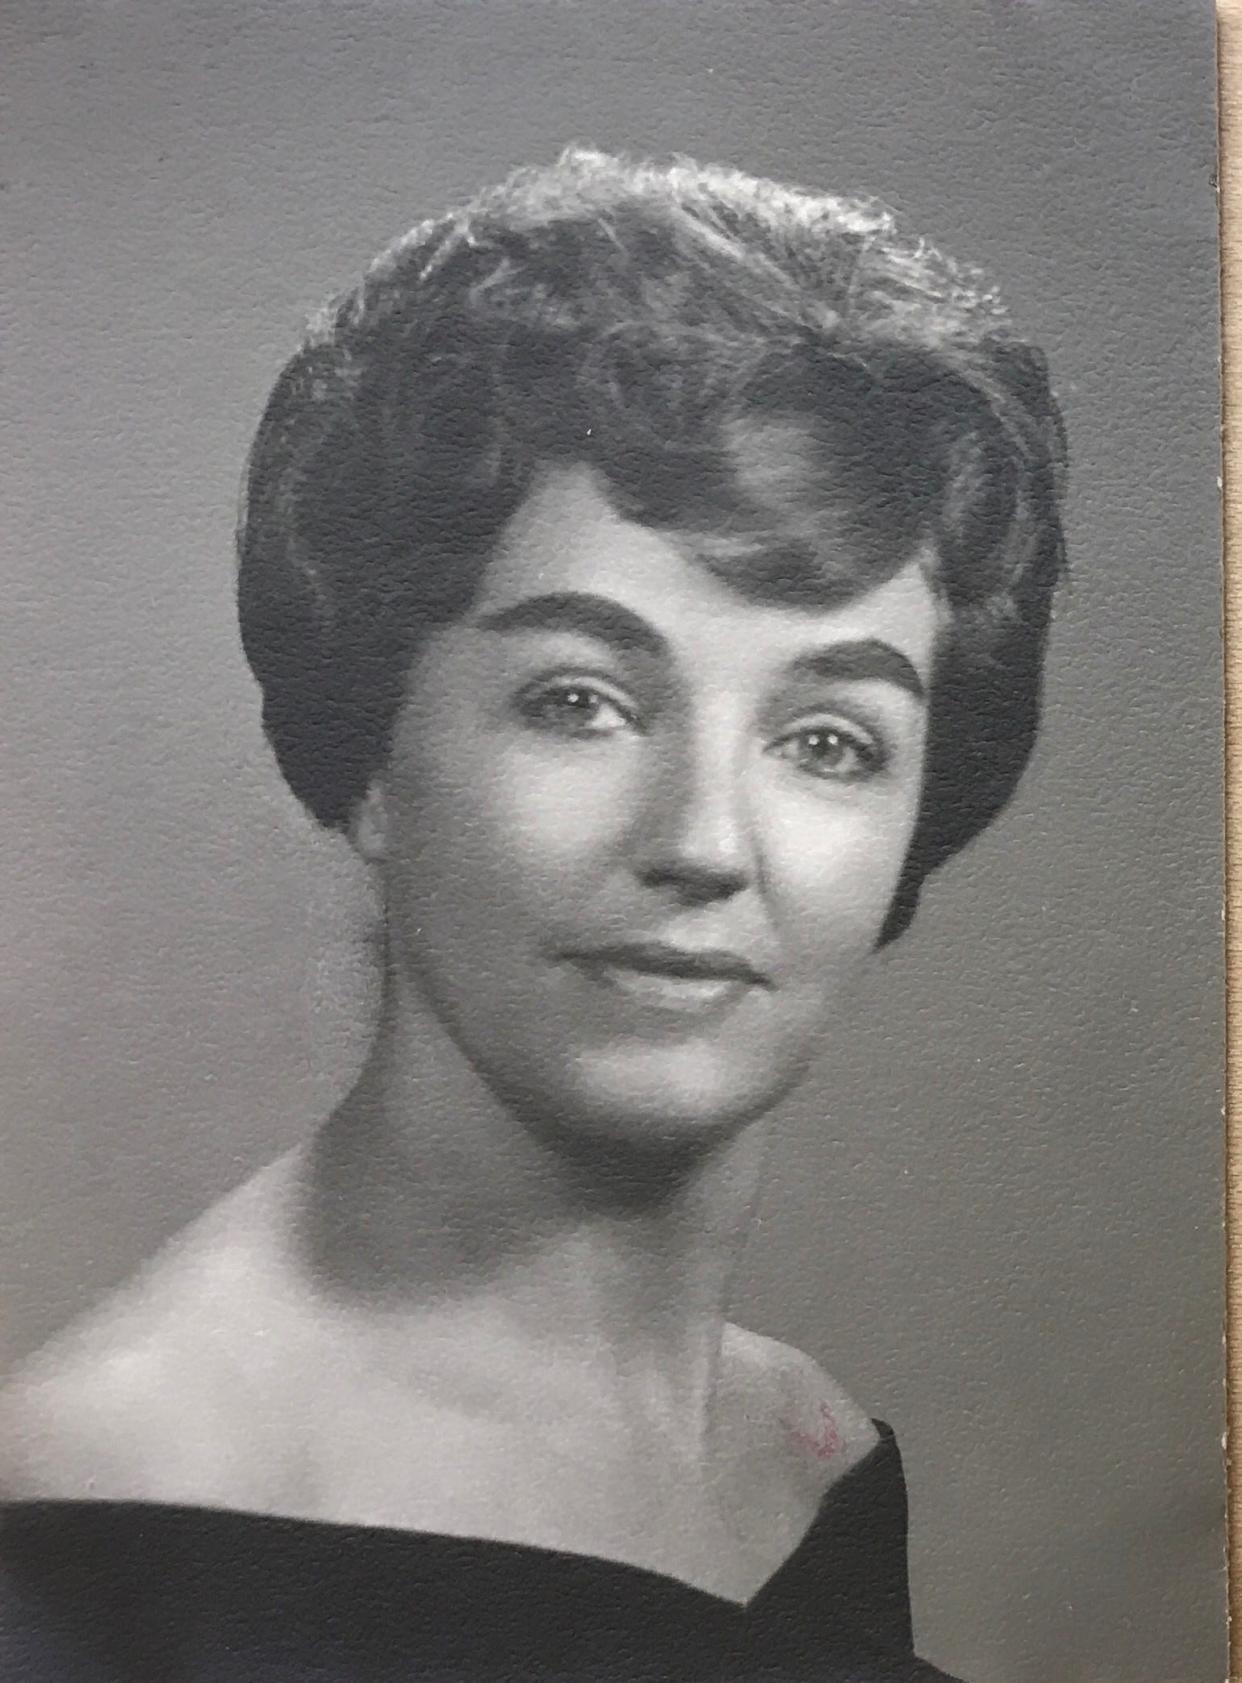 Dixie Demuth, the owner of "Dixie's Elbow Room," circa 1963, about the time she opened her bar.